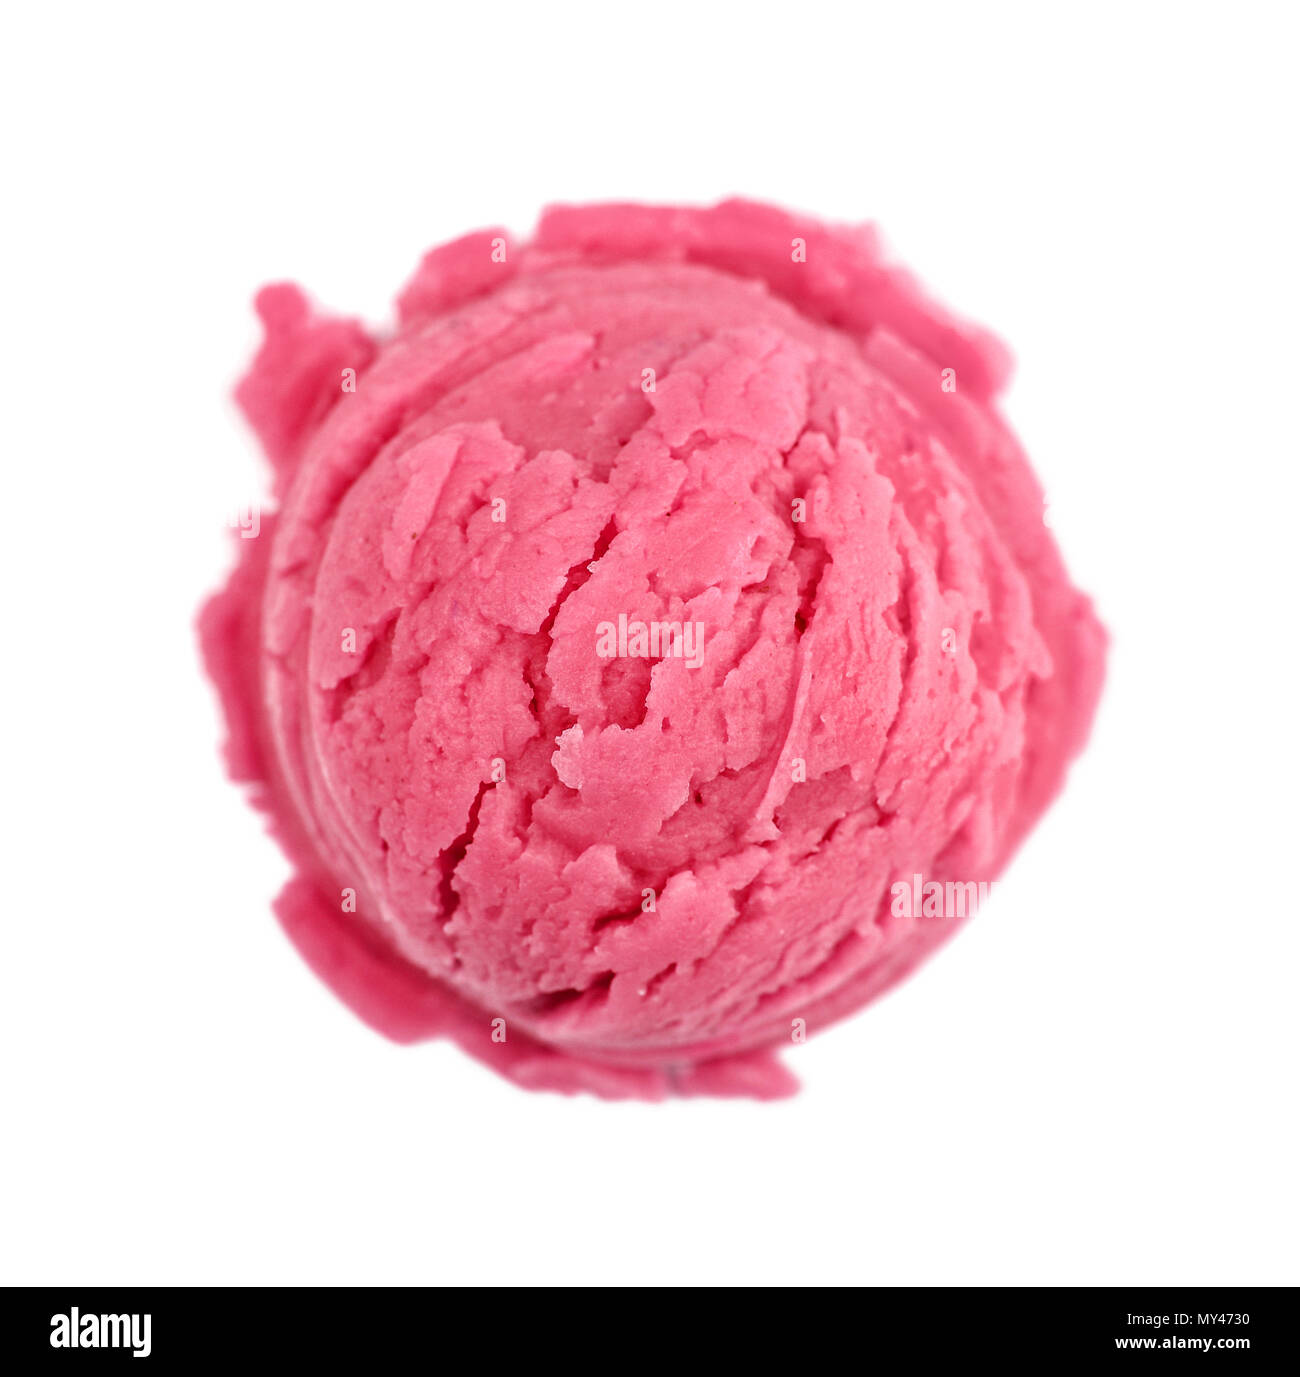 https://c8.alamy.com/comp/MY4730/scoop-of-pink-ice-cream-isolated-on-white-background-top-view-MY4730.jpg